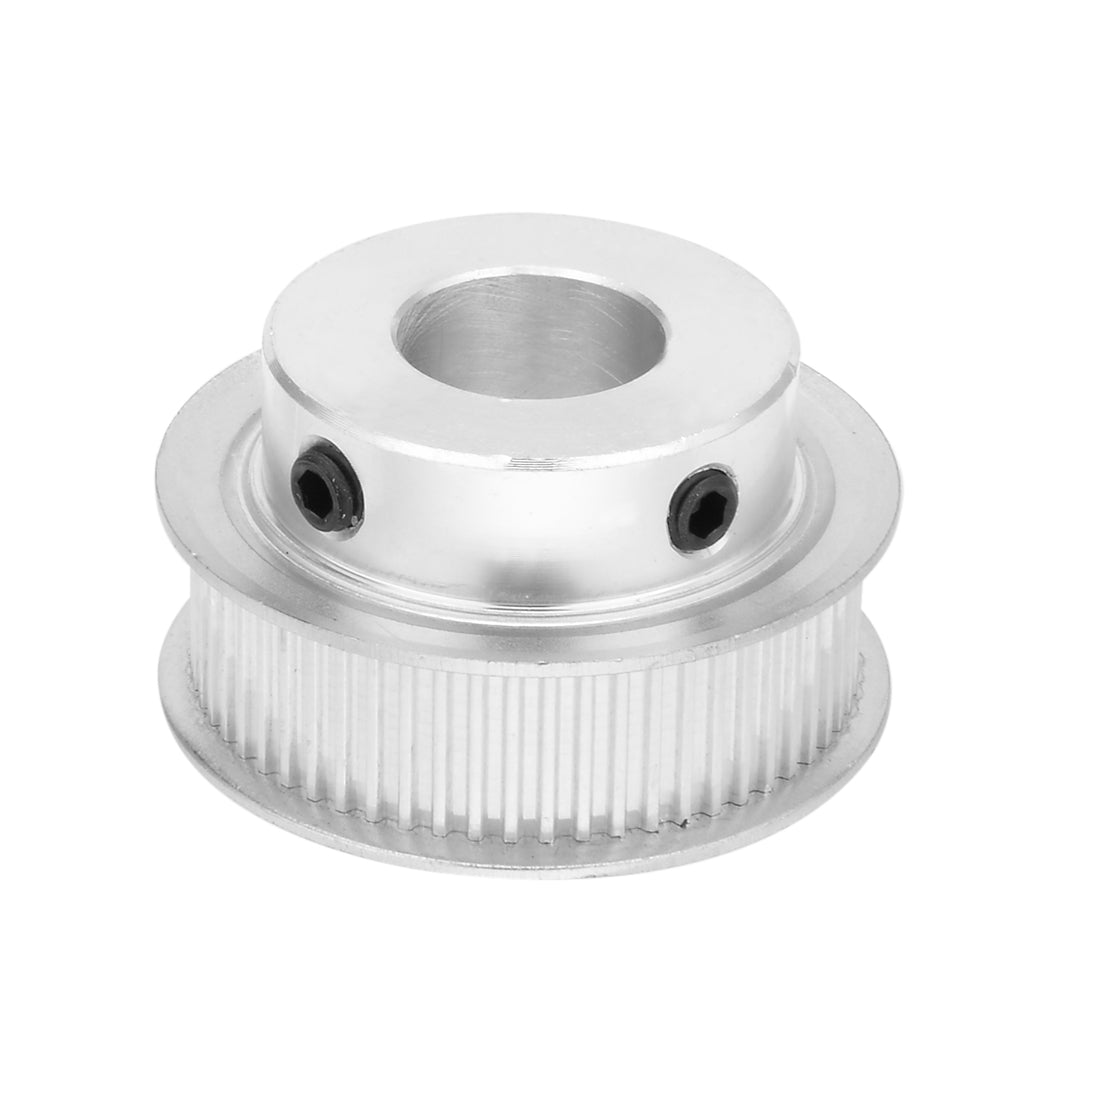 uxcell Uxcell Aluminum M-X-L 60 Teeth 15mm Bore Timing Belt Idler Pulley Synchronous Wheel 10mm Belt for 3D Printer CNC